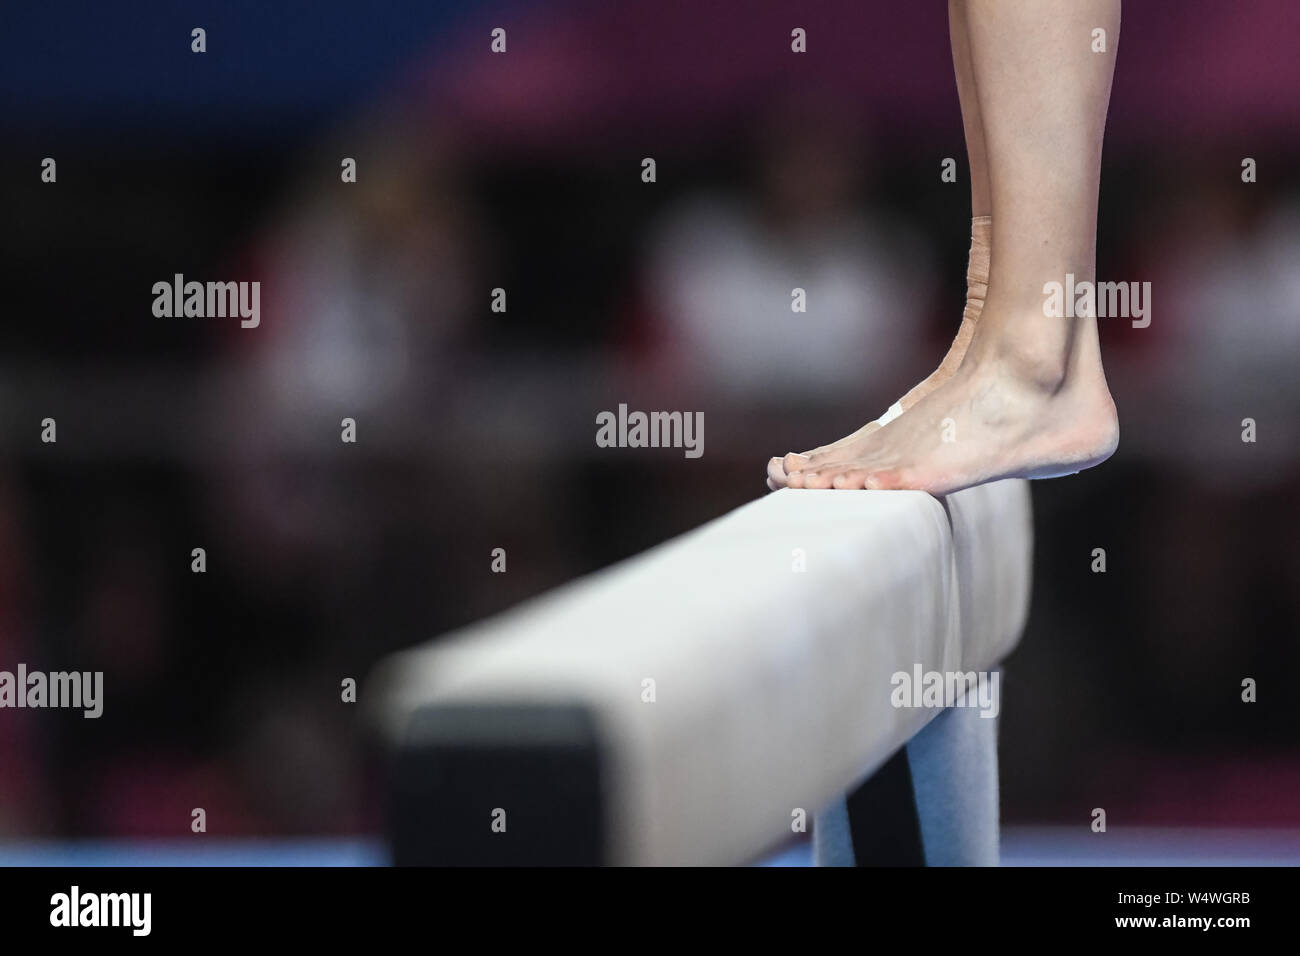 July 24, 2019, Lima, Peru: A gymnast practices on the balance beam during podium training before the competition held in the Polideportivo Villa El Salvador in Lima, Peru. Credit: Amy Sanderson/ZUMA Wire/Alamy Live News Stock Photo